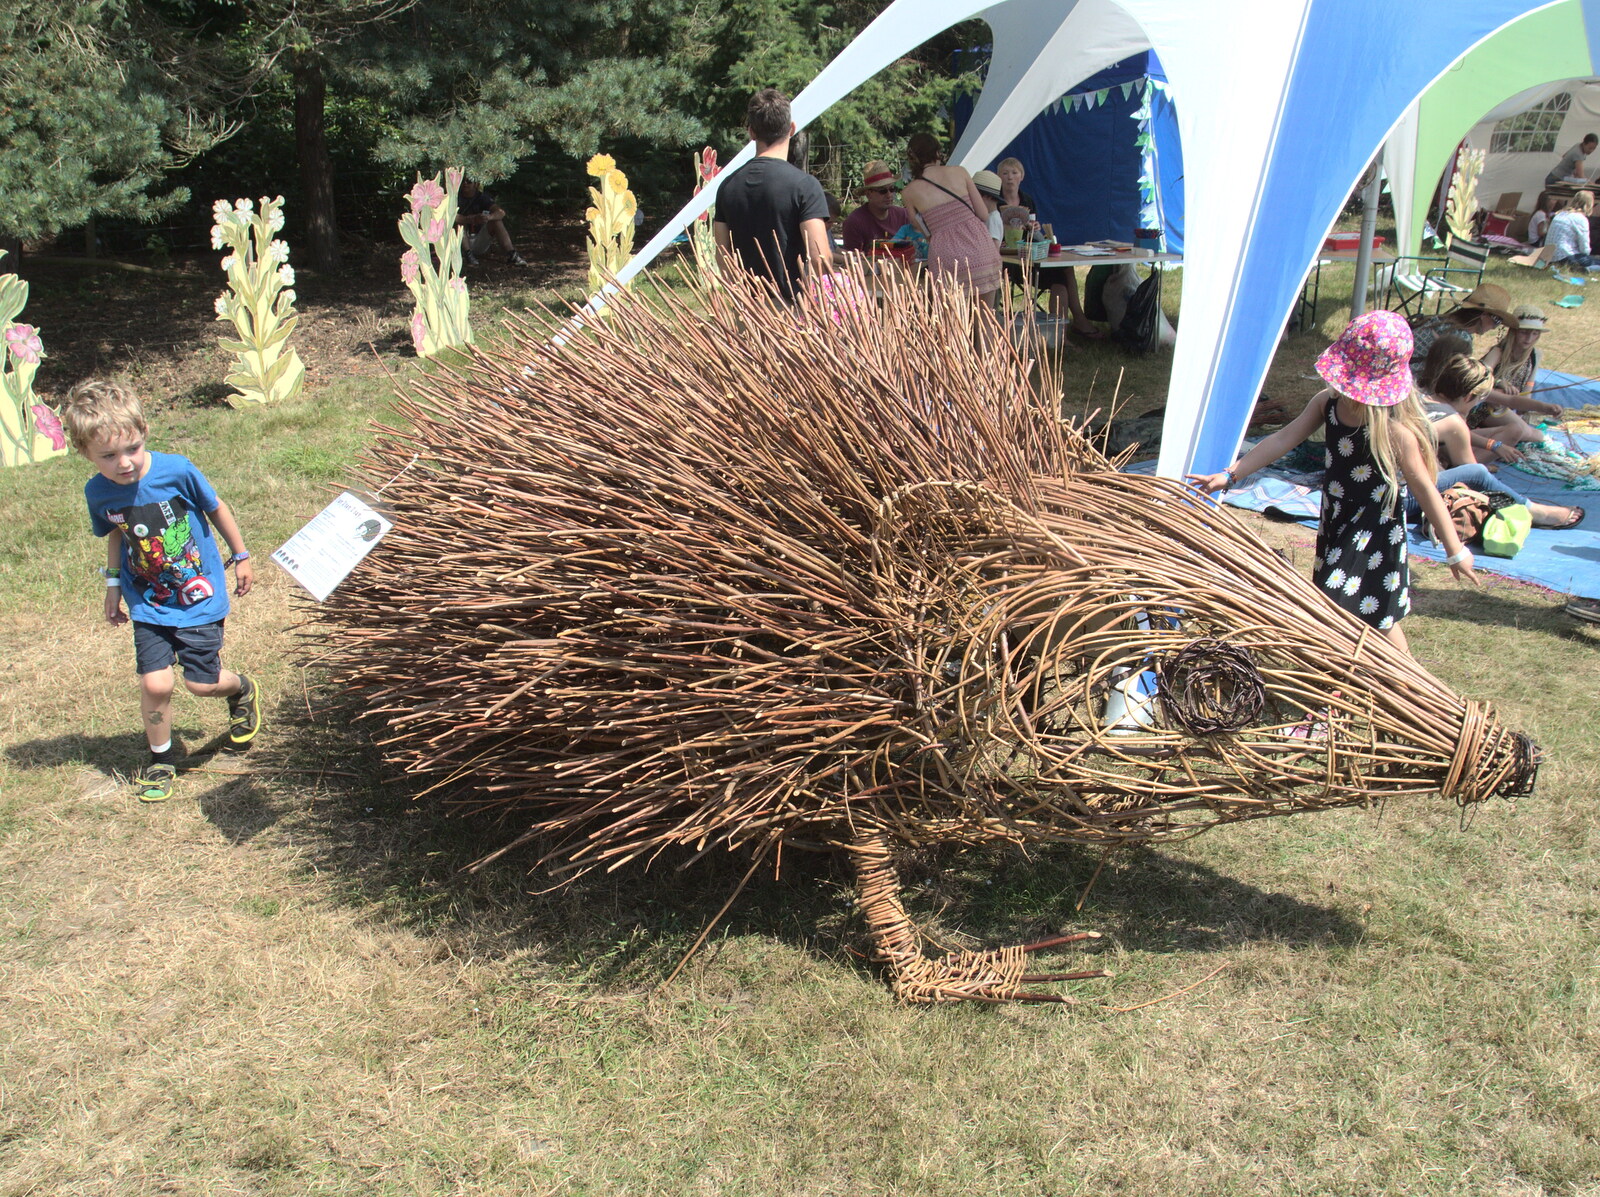 Fred inspects a large spiky hedgehog from Latitude Festival, Henham Park, Southwold, Suffolk - 17th July 2014